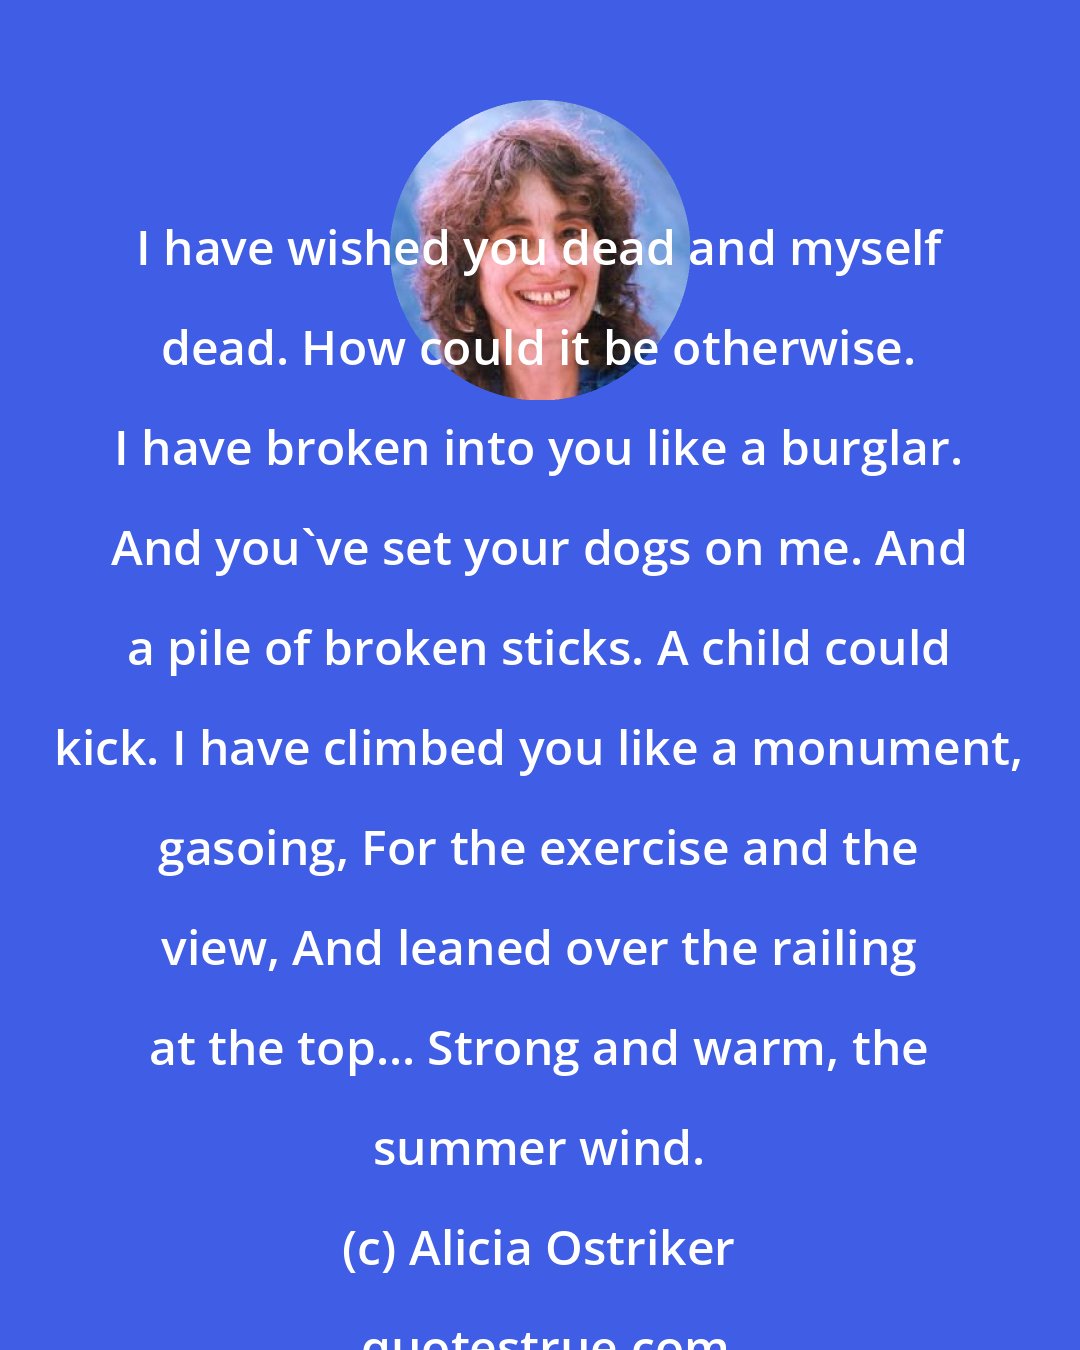 Alicia Ostriker: I have wished you dead and myself dead. How could it be otherwise. I have broken into you like a burglar. And you've set your dogs on me. And a pile of broken sticks. A child could kick. I have climbed you like a monument, gasoing, For the exercise and the view, And leaned over the railing at the top... Strong and warm, the summer wind.